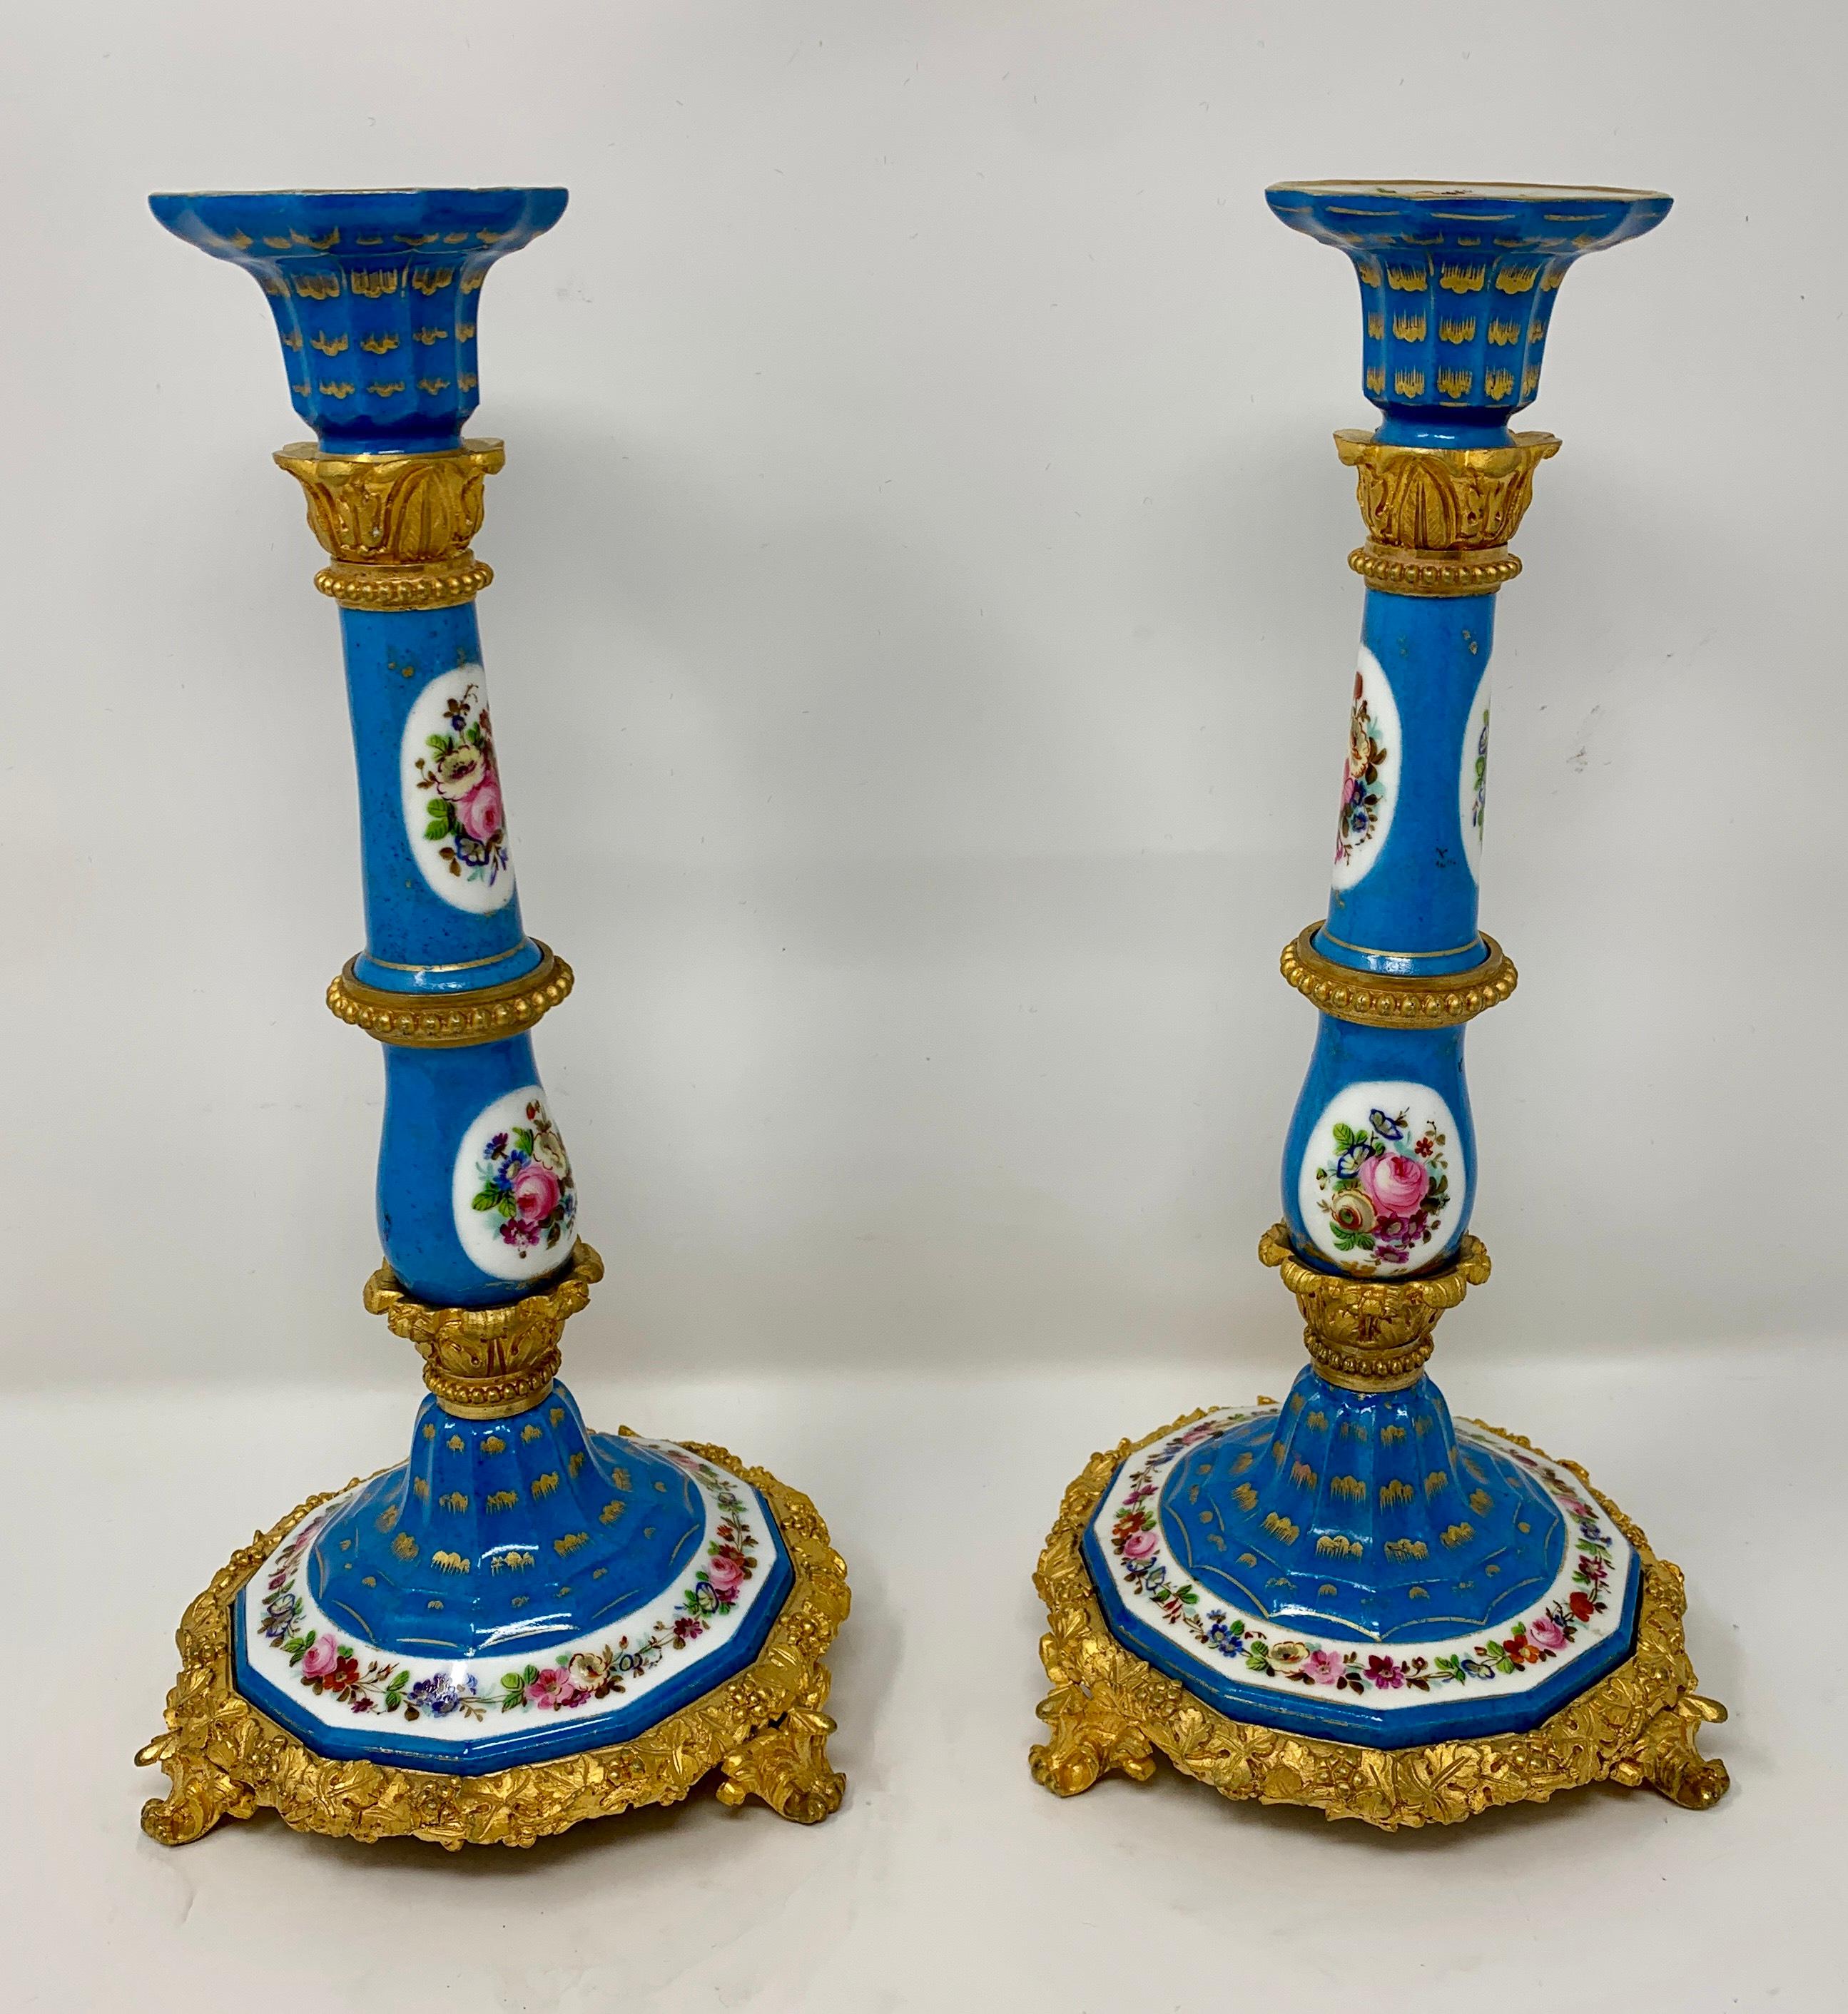 These handsome candlesticks have retained their fine color and detail. This 